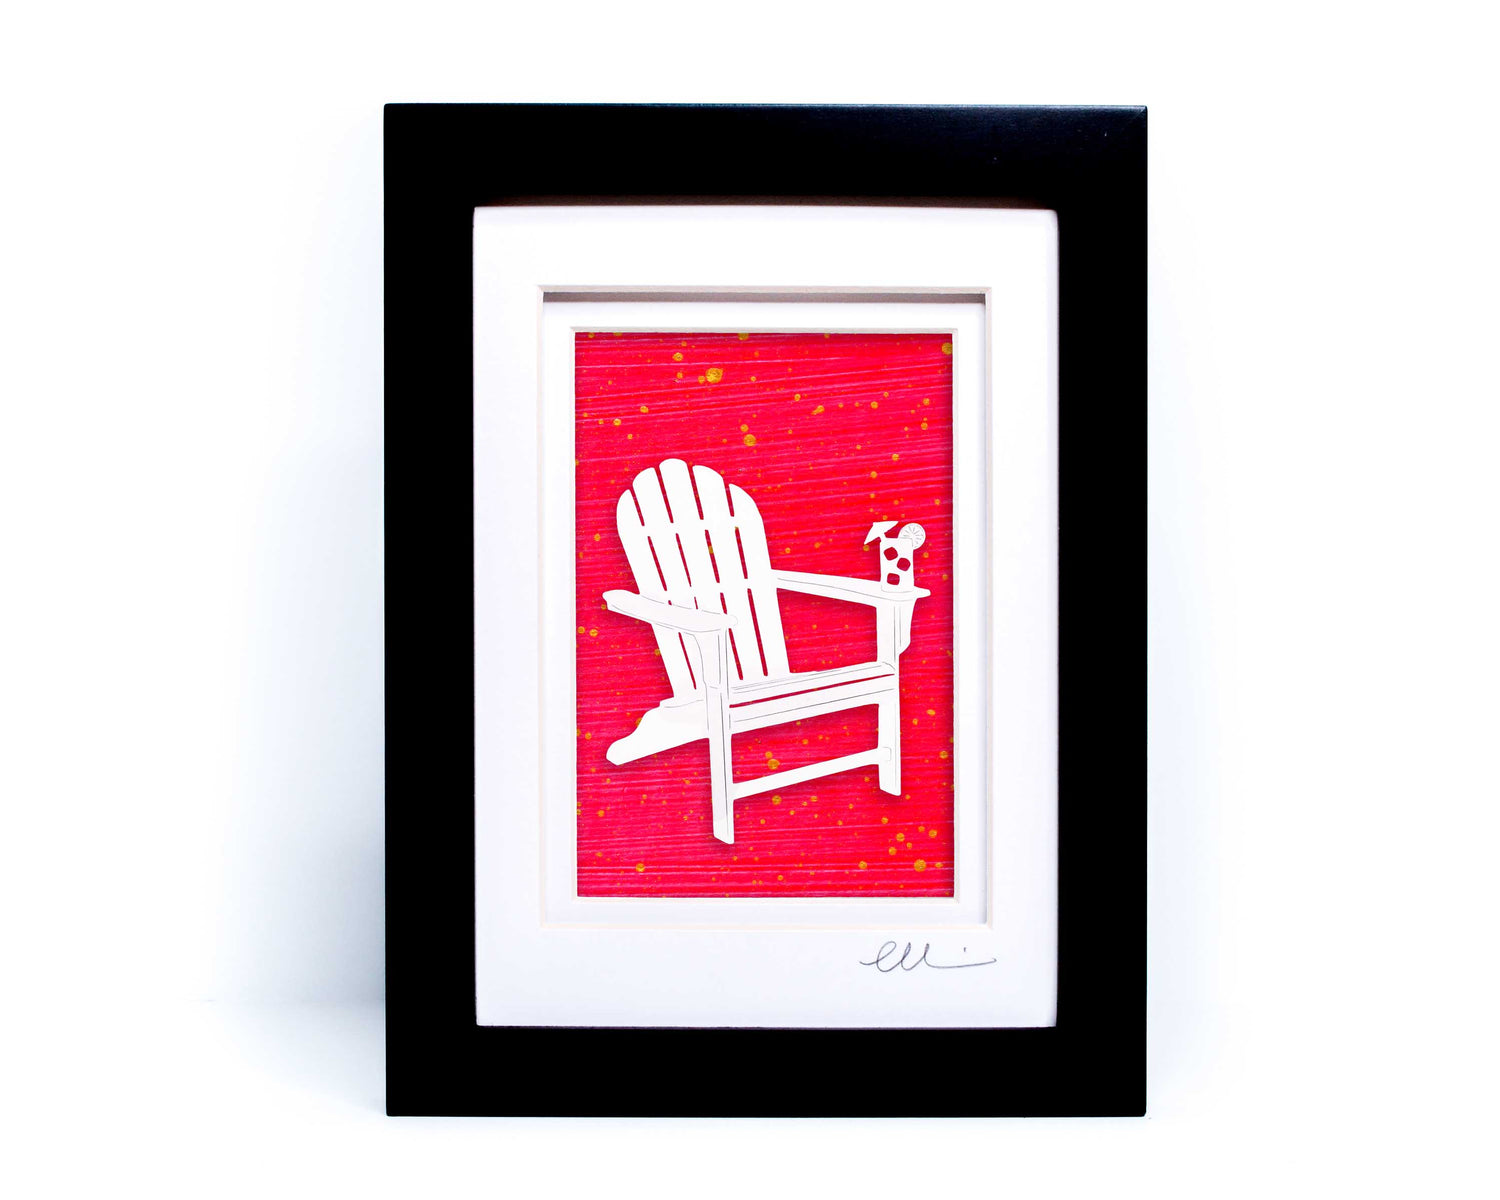 White beach adirondack chair with drink on chair arm papercut on hand painted neon pink background. 